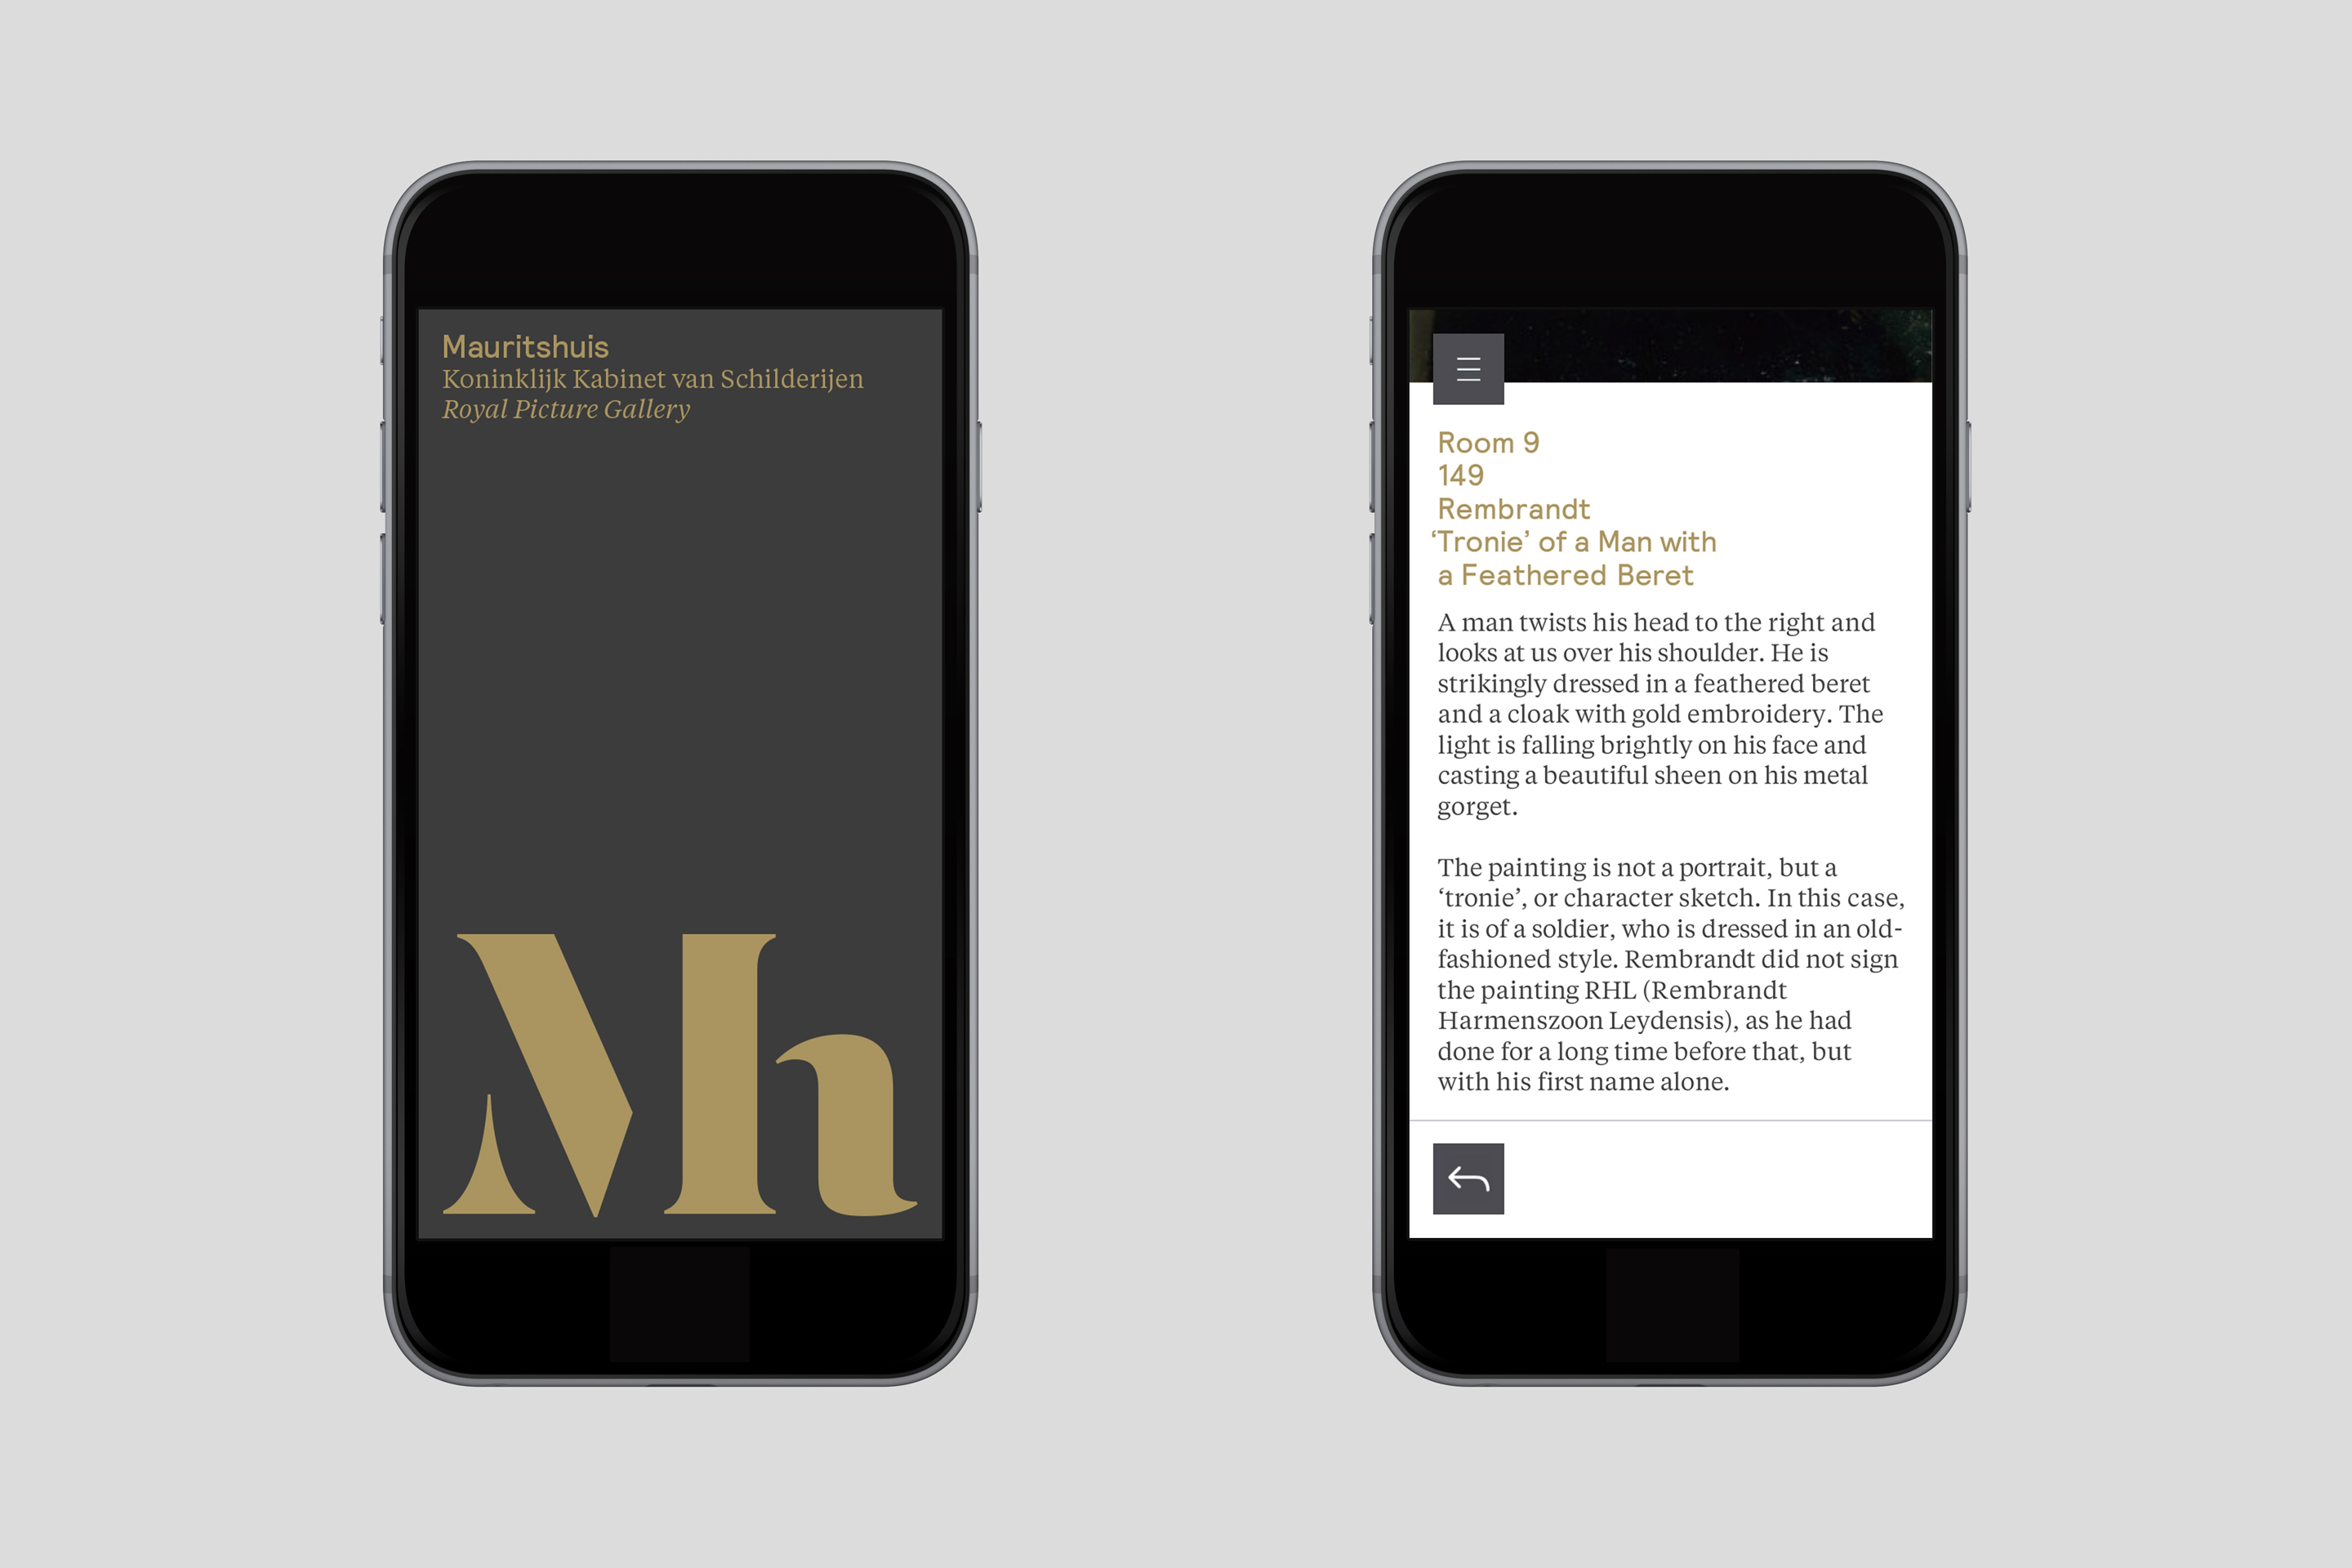 studio dumbar design visual brand identity for Mauritshuis Royal Picture Gallery  mobile app design